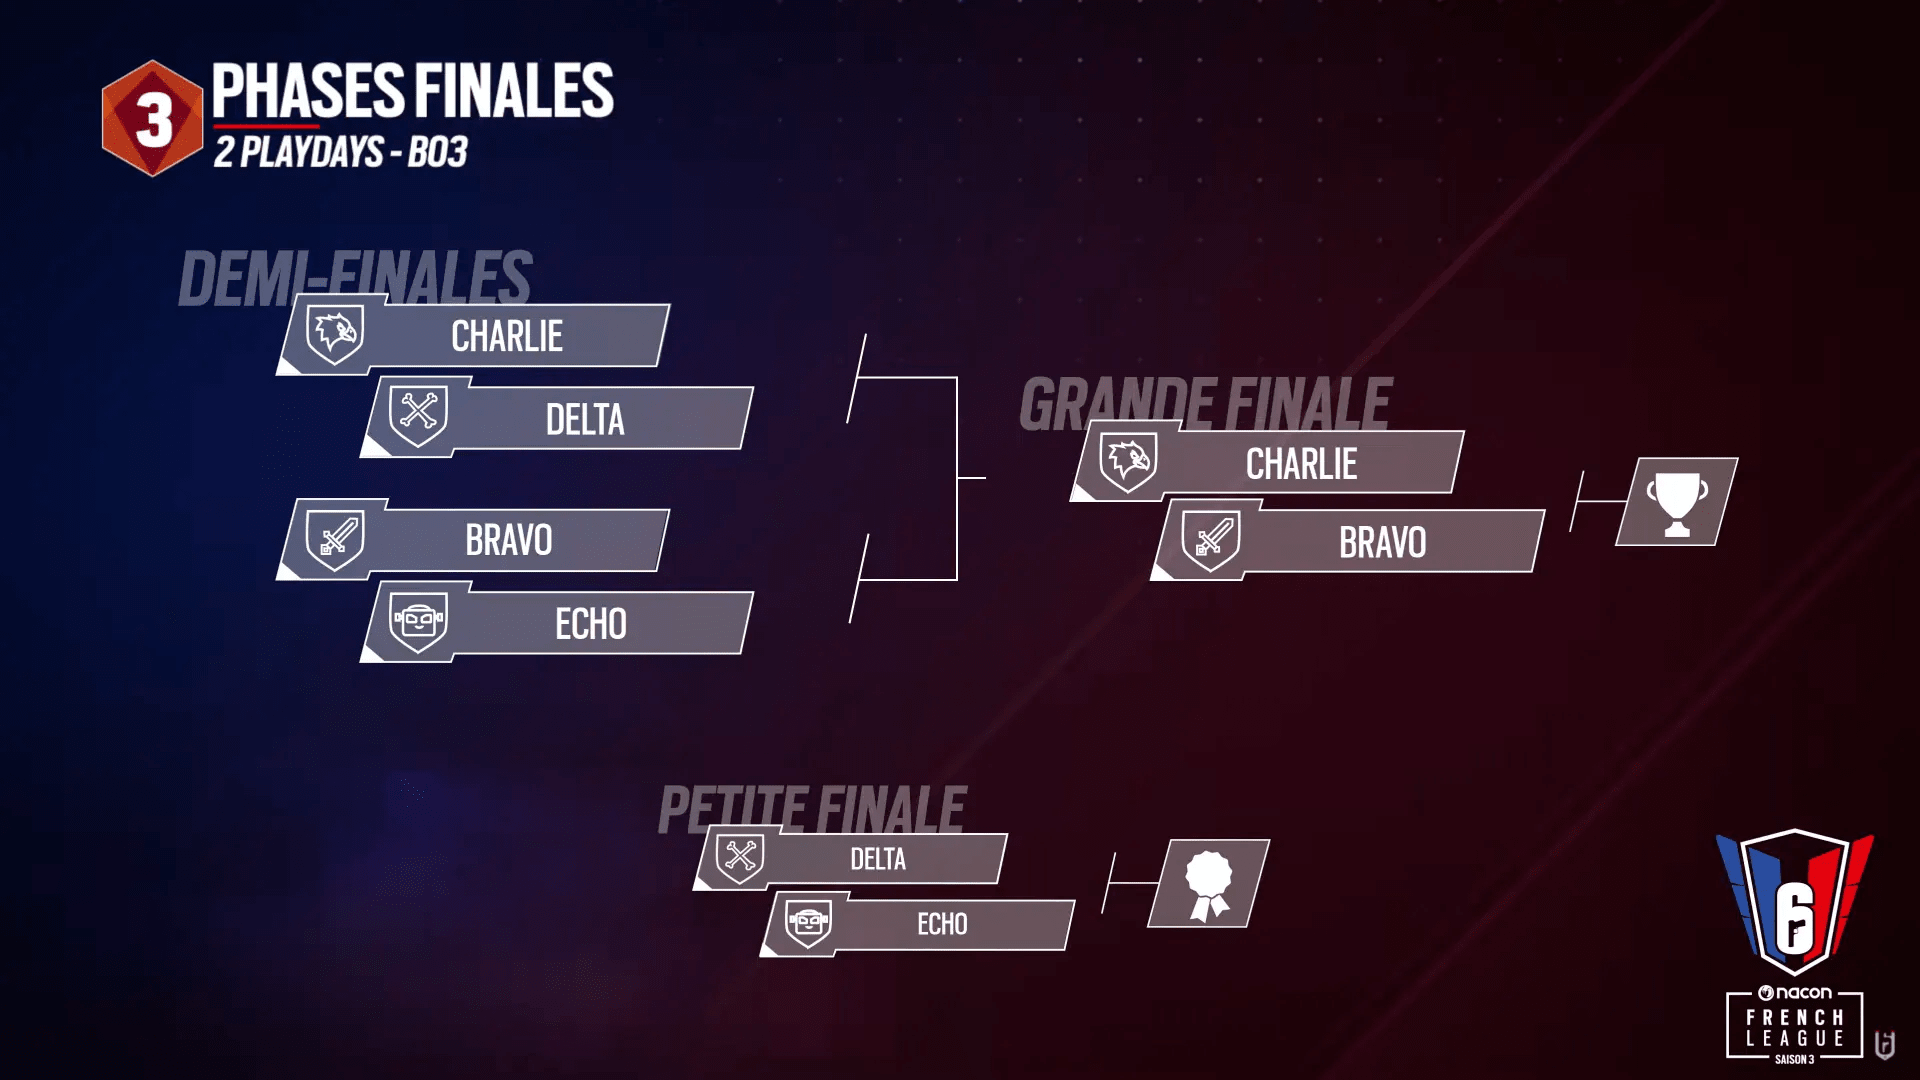 format-r6-french-league-phases-finales-tcl